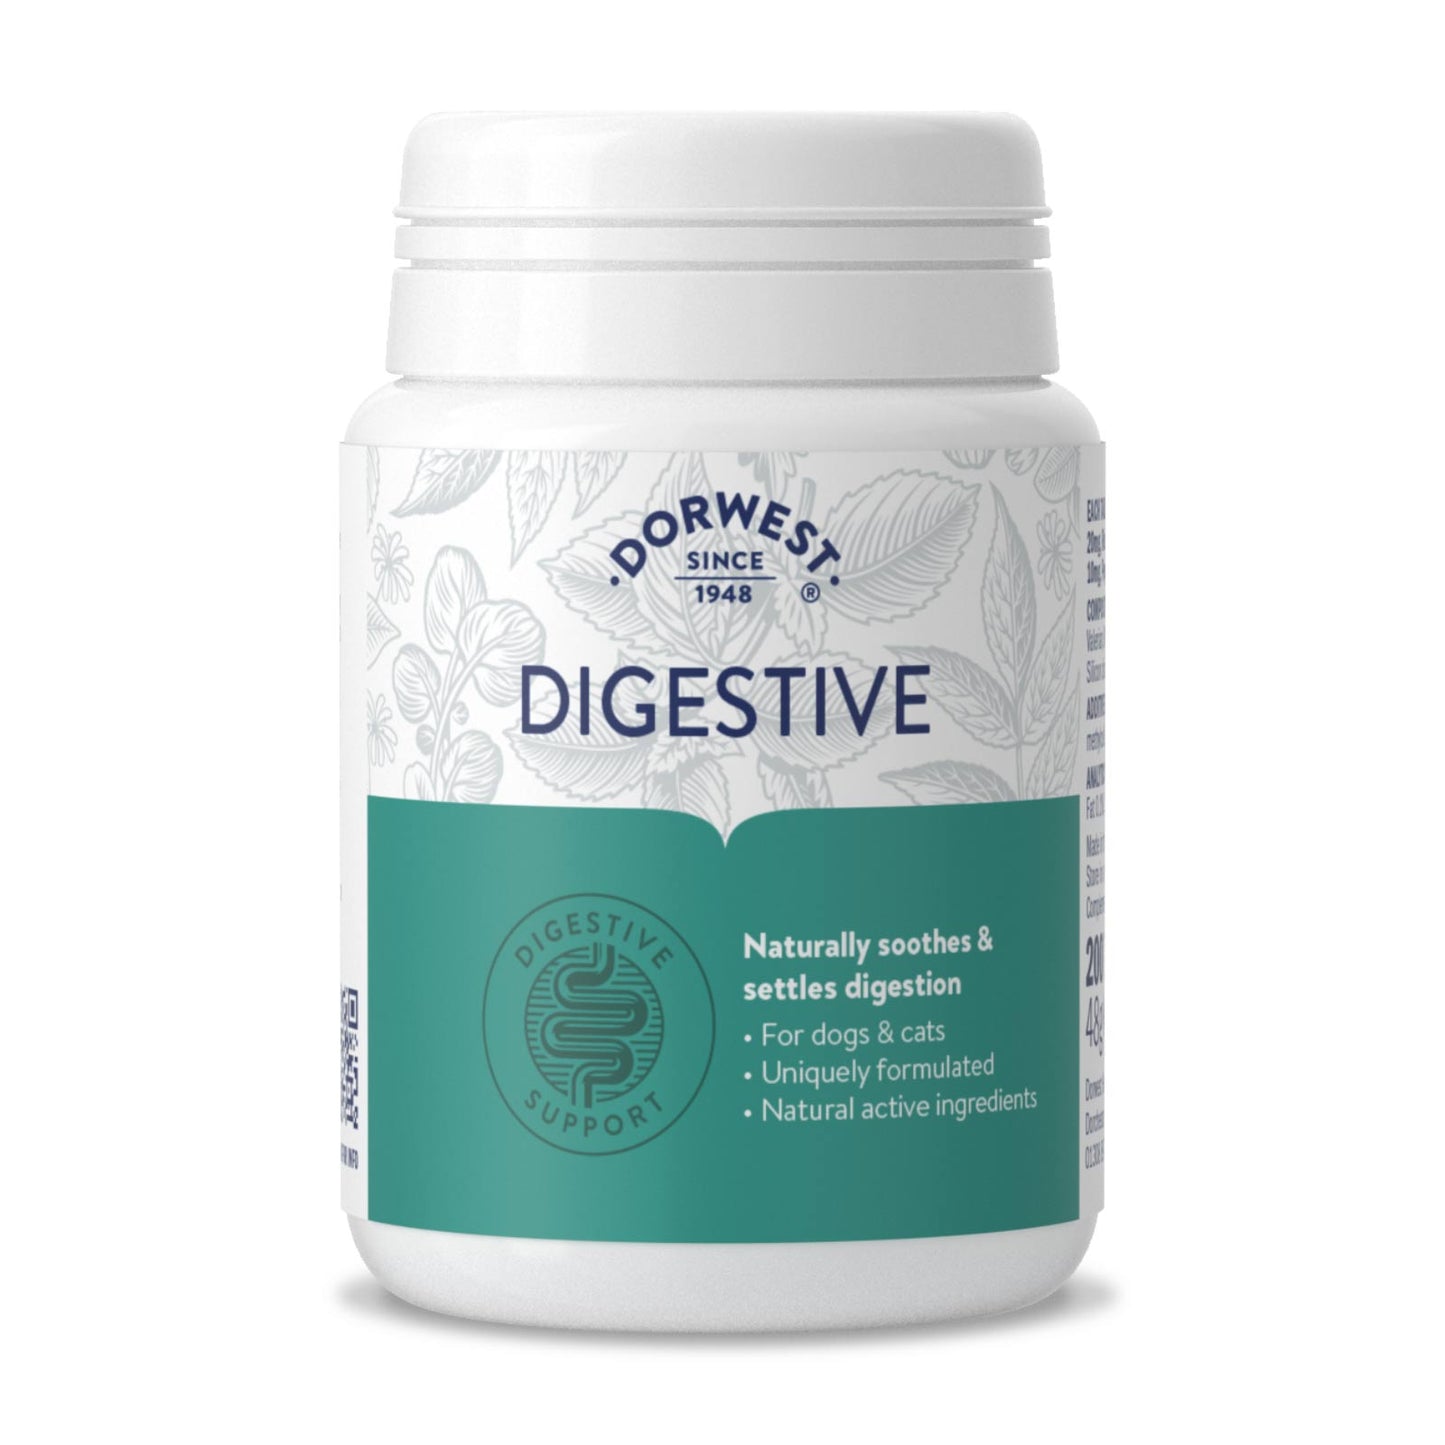 Dorwest Digestive Tablets For Dogs And Cats (Upset Stomach & Digestive Issues)